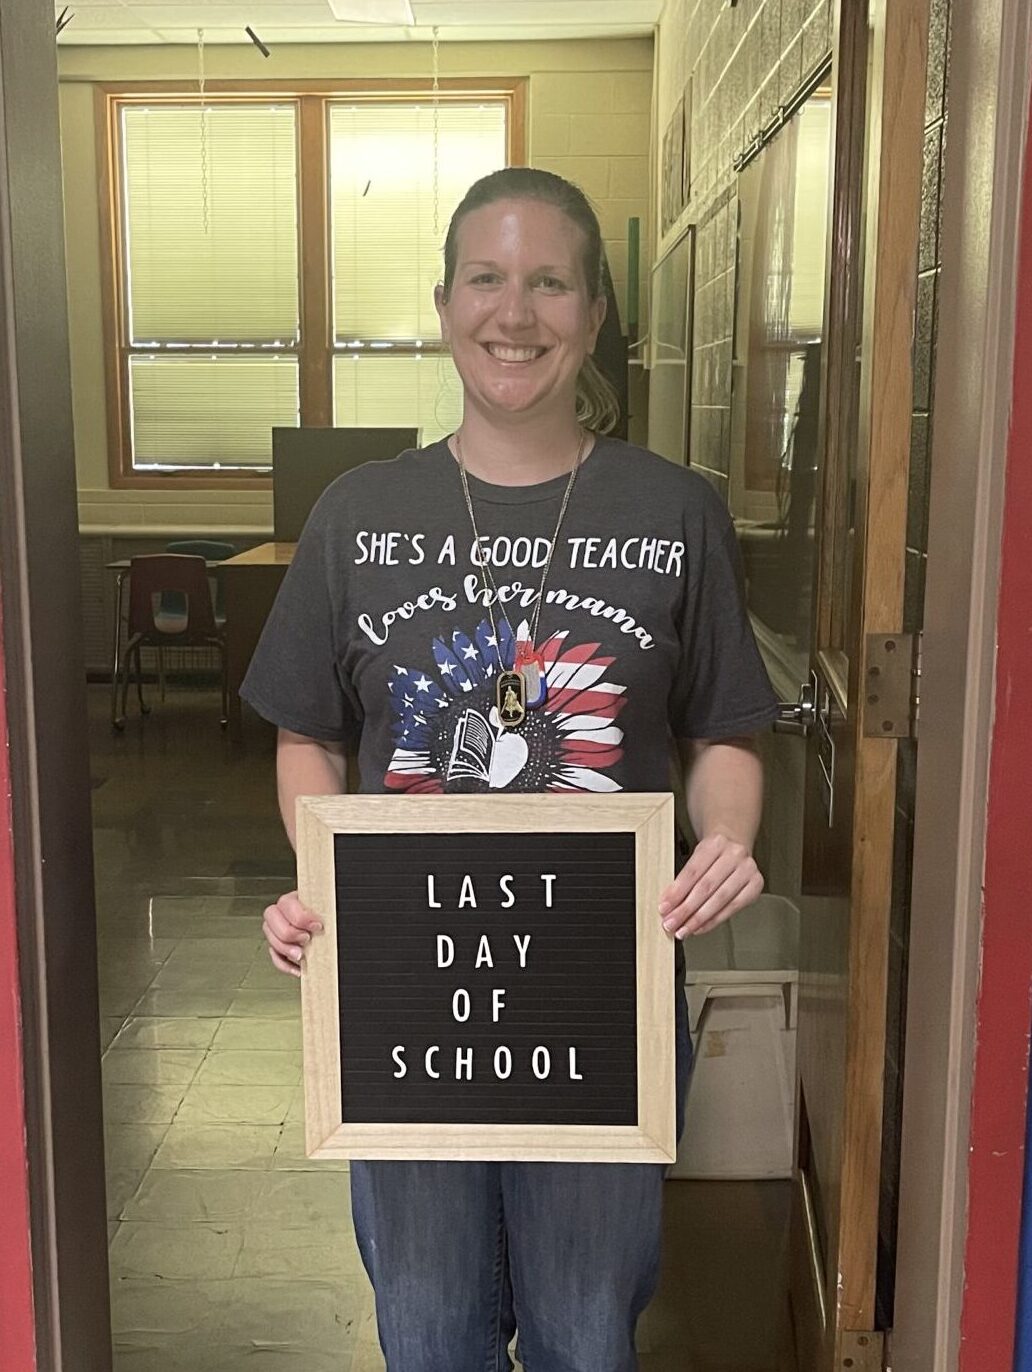 Sierra Erdmann holding a sign that says "Last Day of School" while standing in front of her classroom.